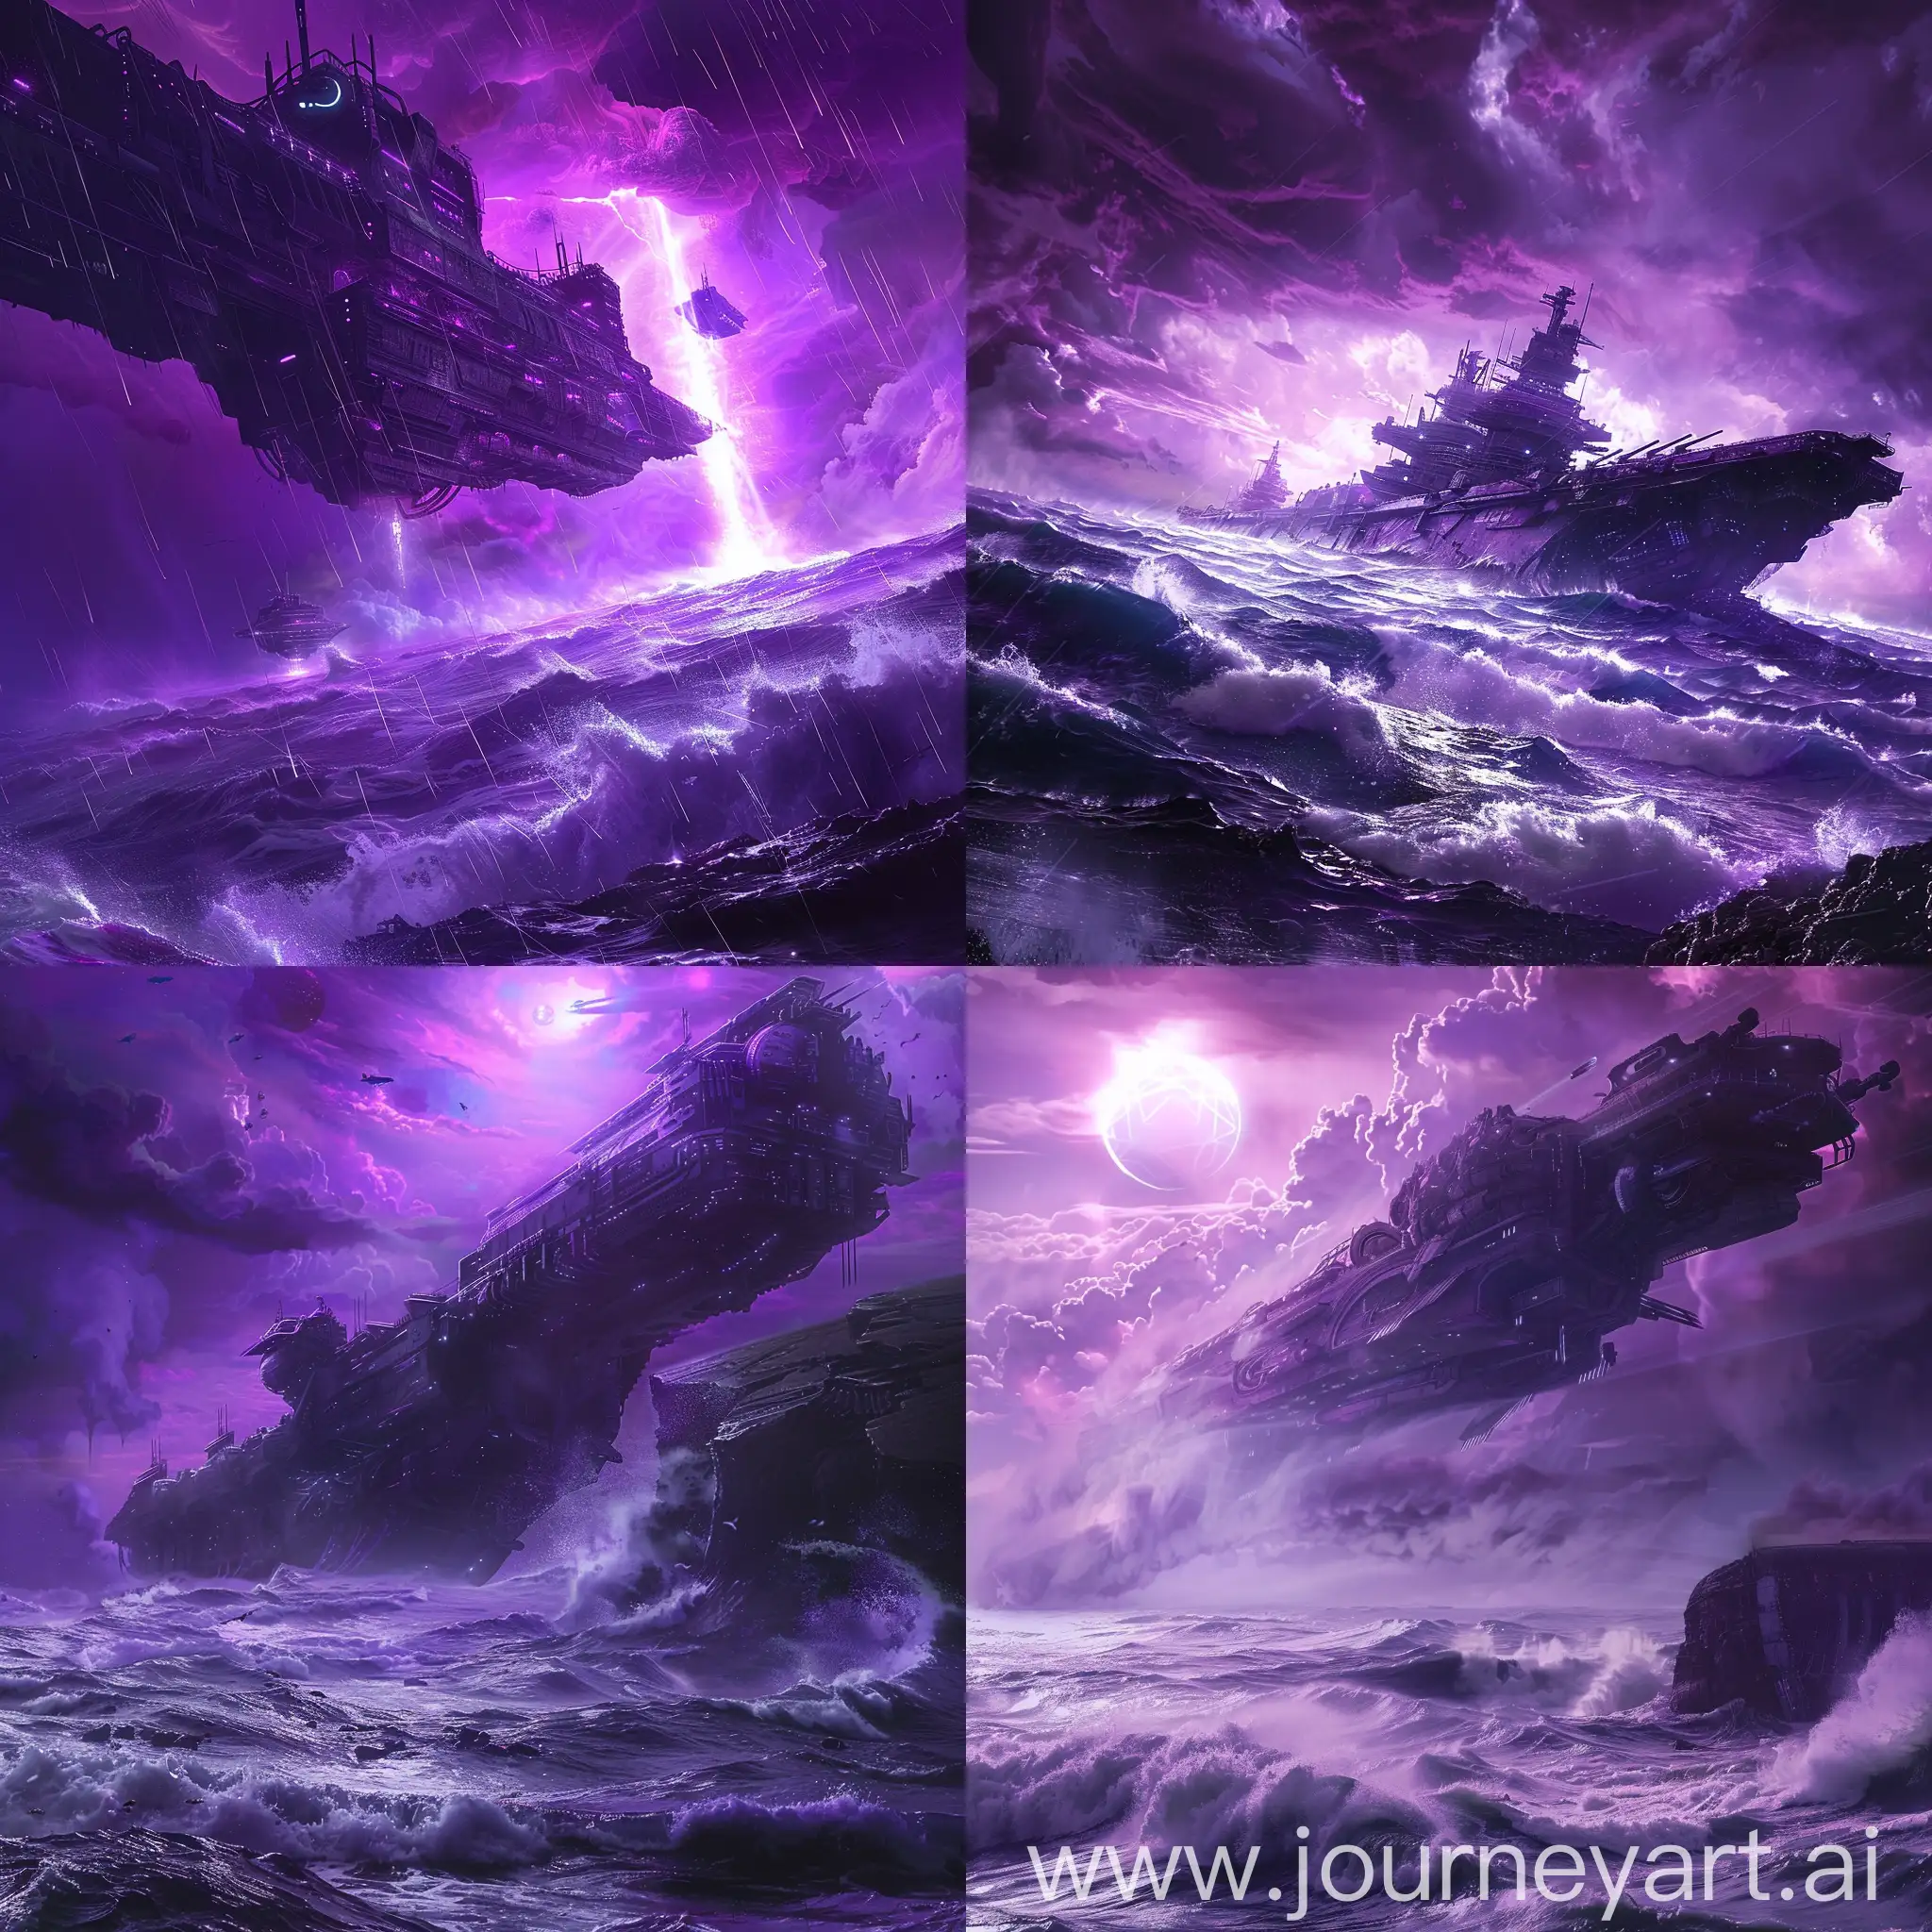 an eery yet bright violet skyline overlooking a giant and very advanced otherwordly ship in a tumultuous ocean, artistic cinematic 